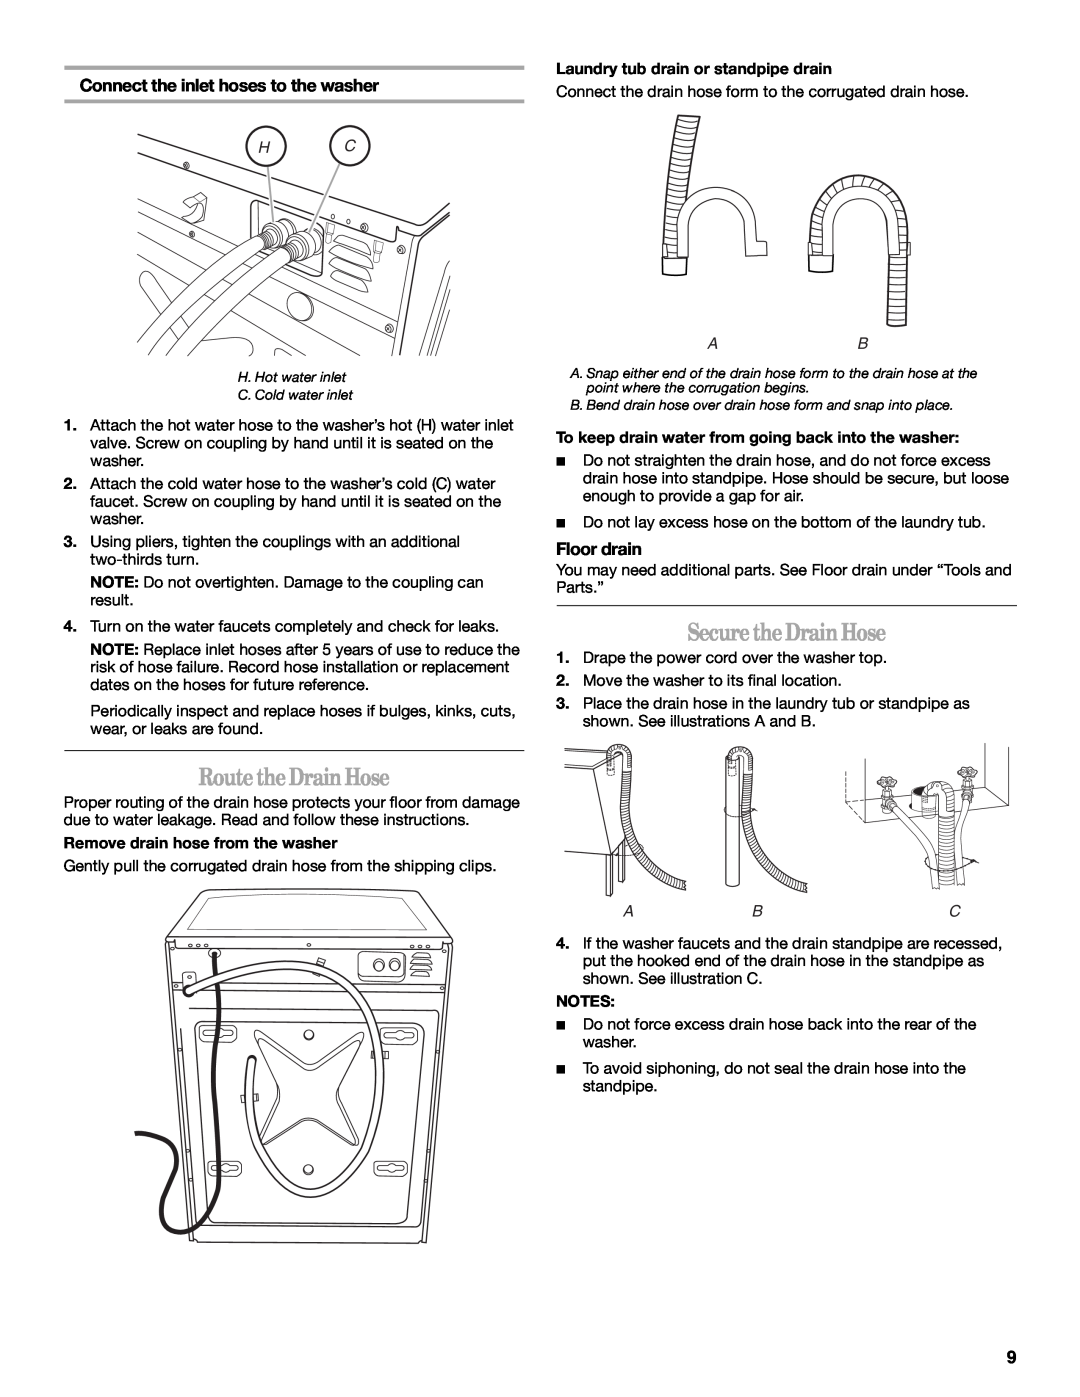 Whirlpool W10063560 manual SecuretheDrain Hose, RoutetheDrainHose, Connect the inlet hoses to the washer, Floor drain 